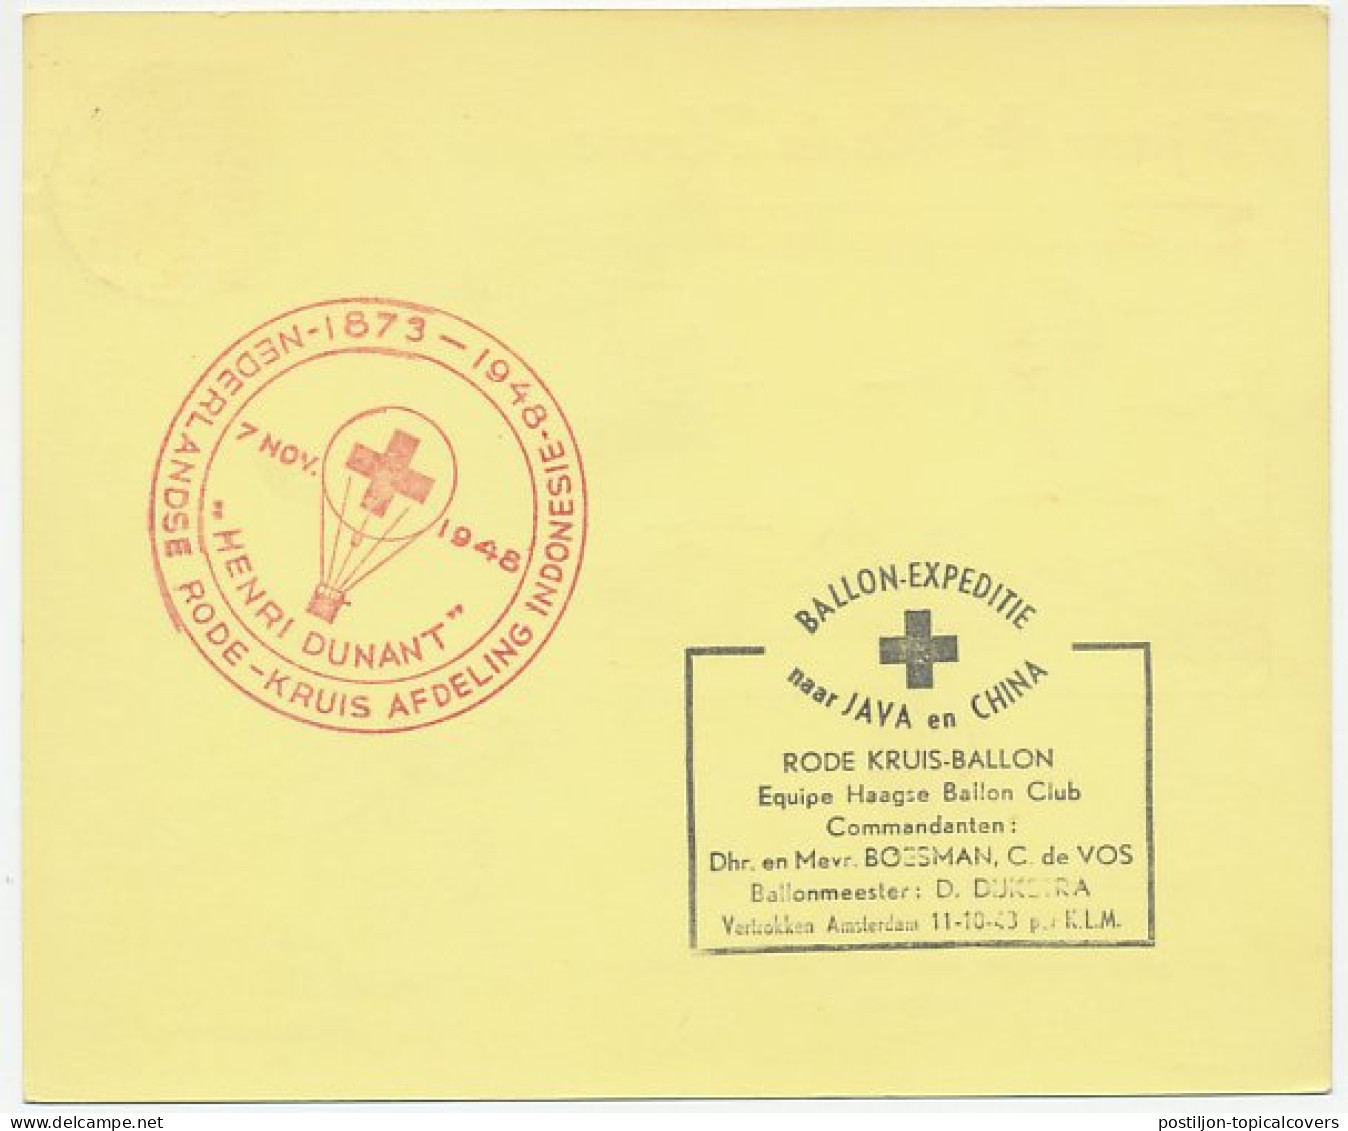 Card / Postmark Indonesia 1948 Red Cross Air Balloon - Expedition To Java And China - Red Cross